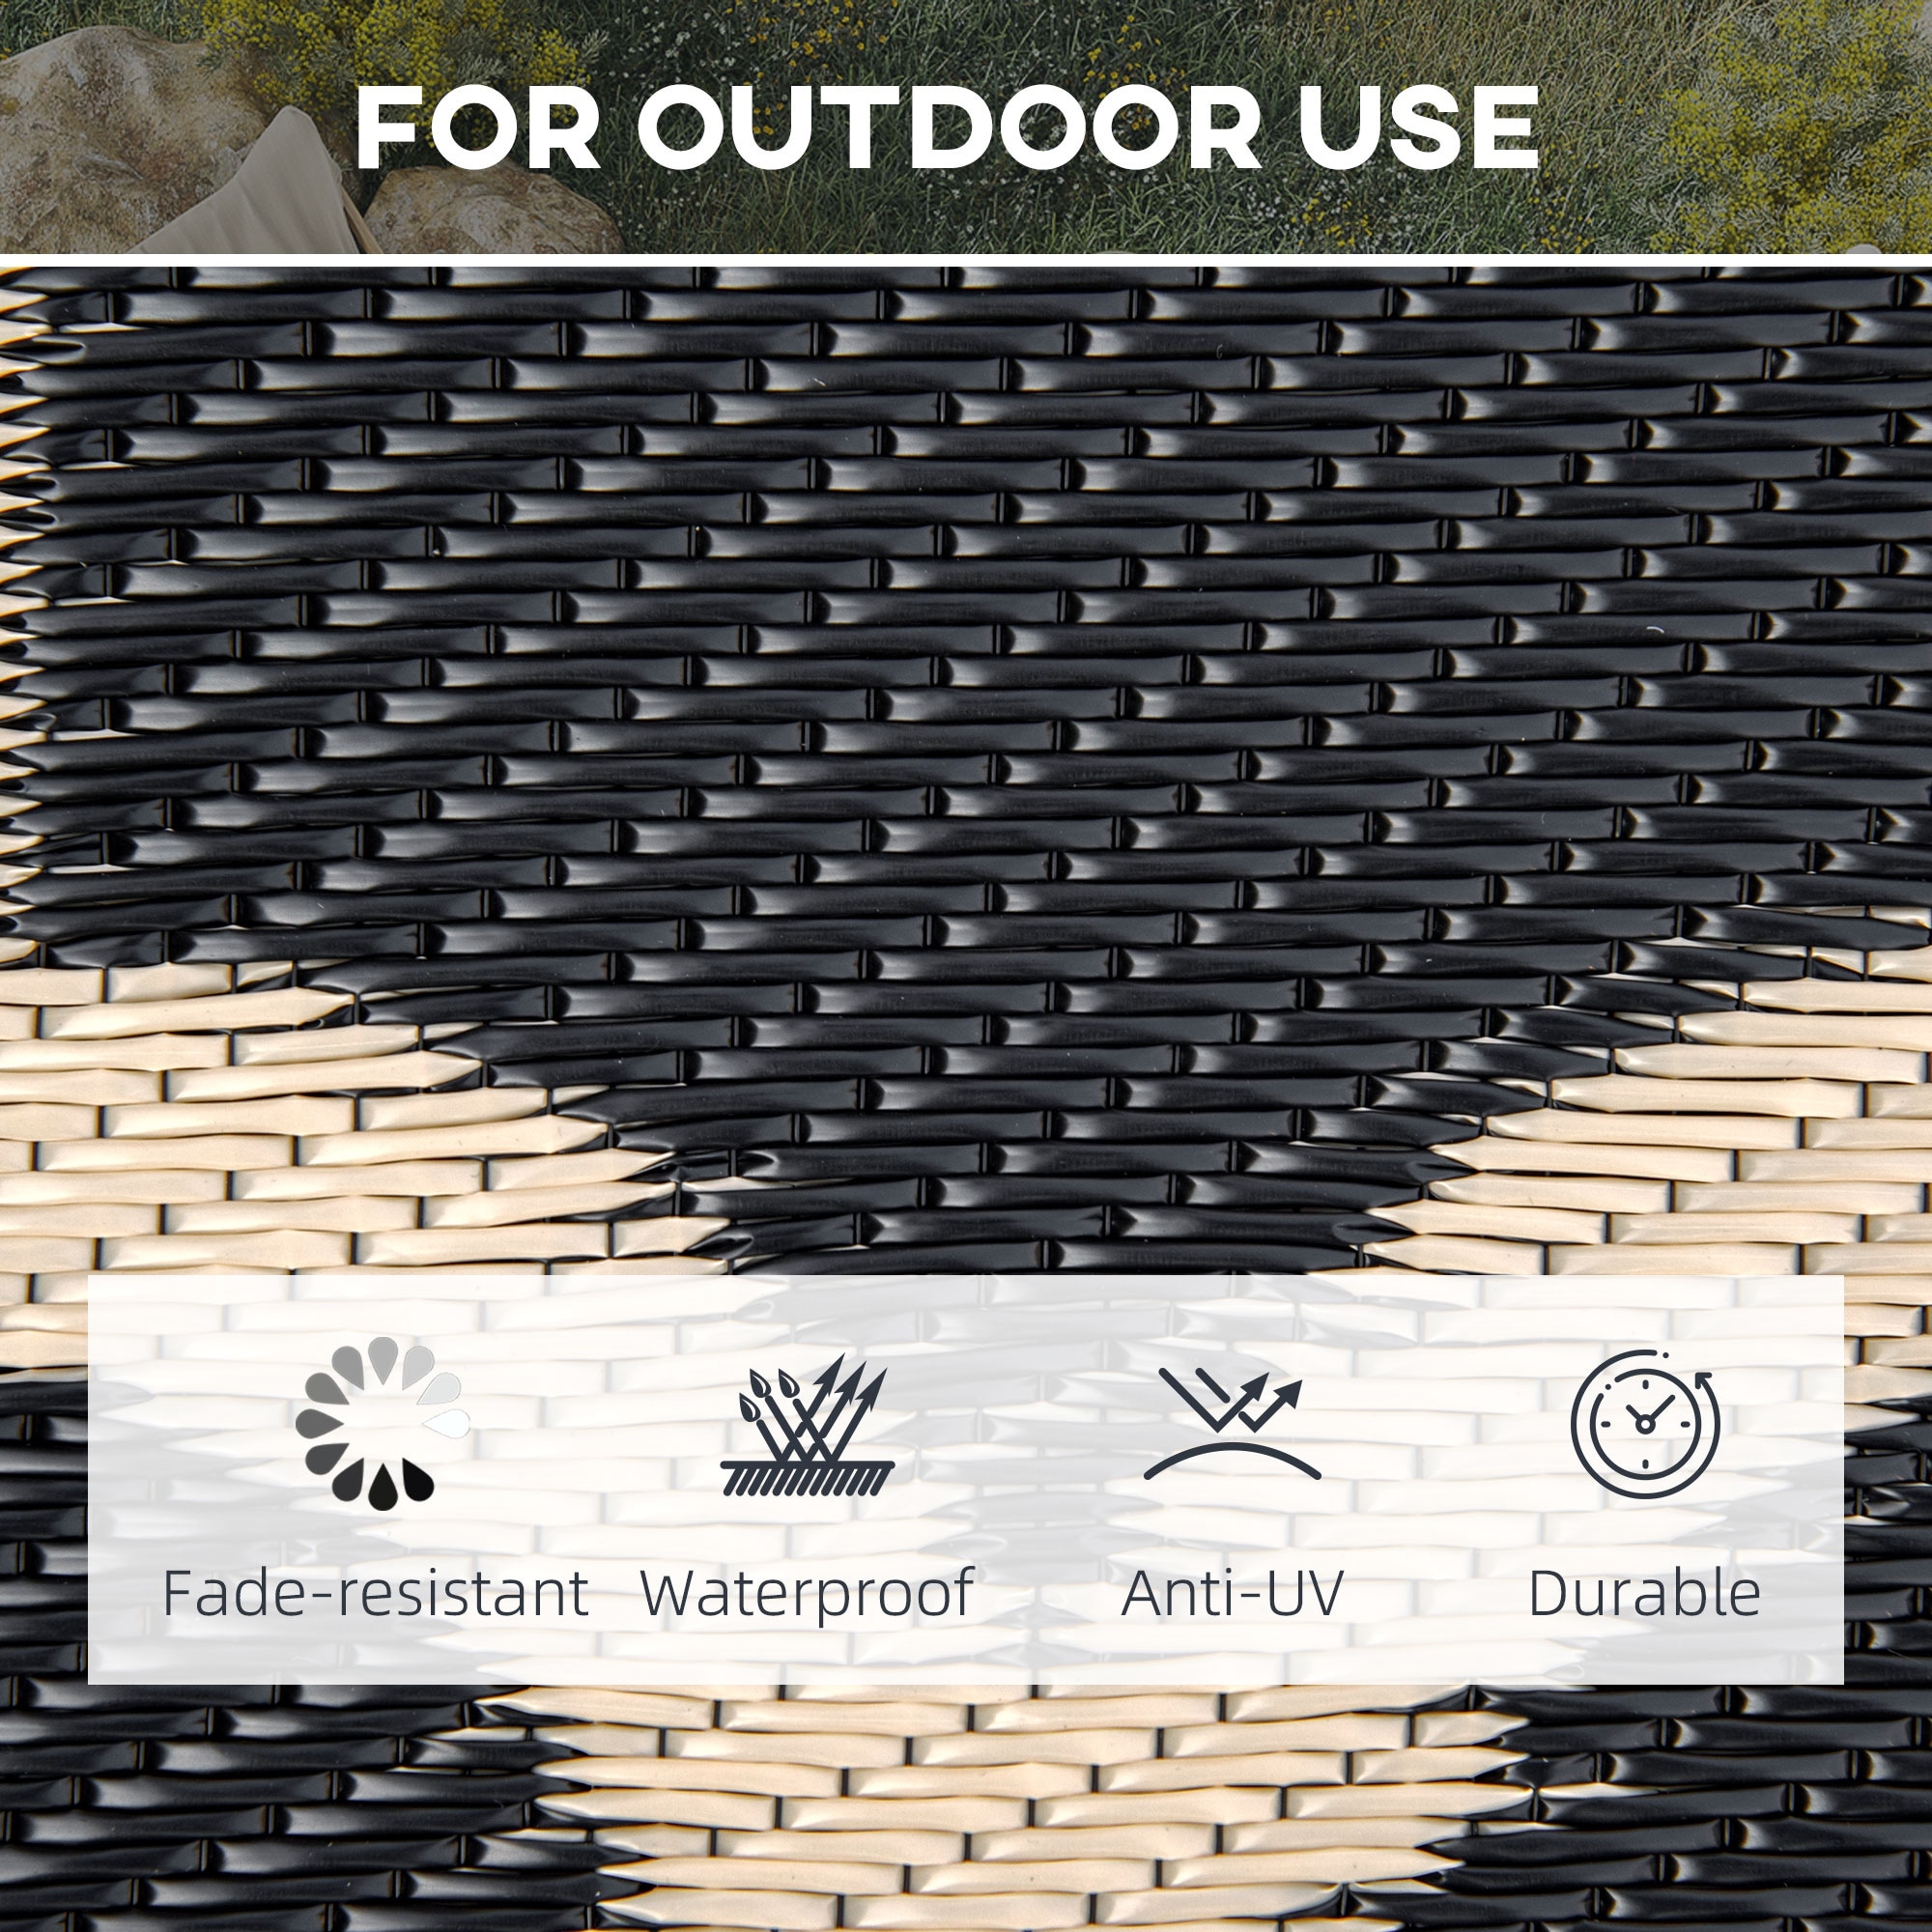 Outdoor Rug for Patios Clearance,Waterproof Mat,Large Outside Carpet,Reversible  Plastic Straw Camping Rugs,Rv,Porch,Deck,Camper,Balcony,Backyard (5x8, for  Sale in Upland, CA - OfferUp